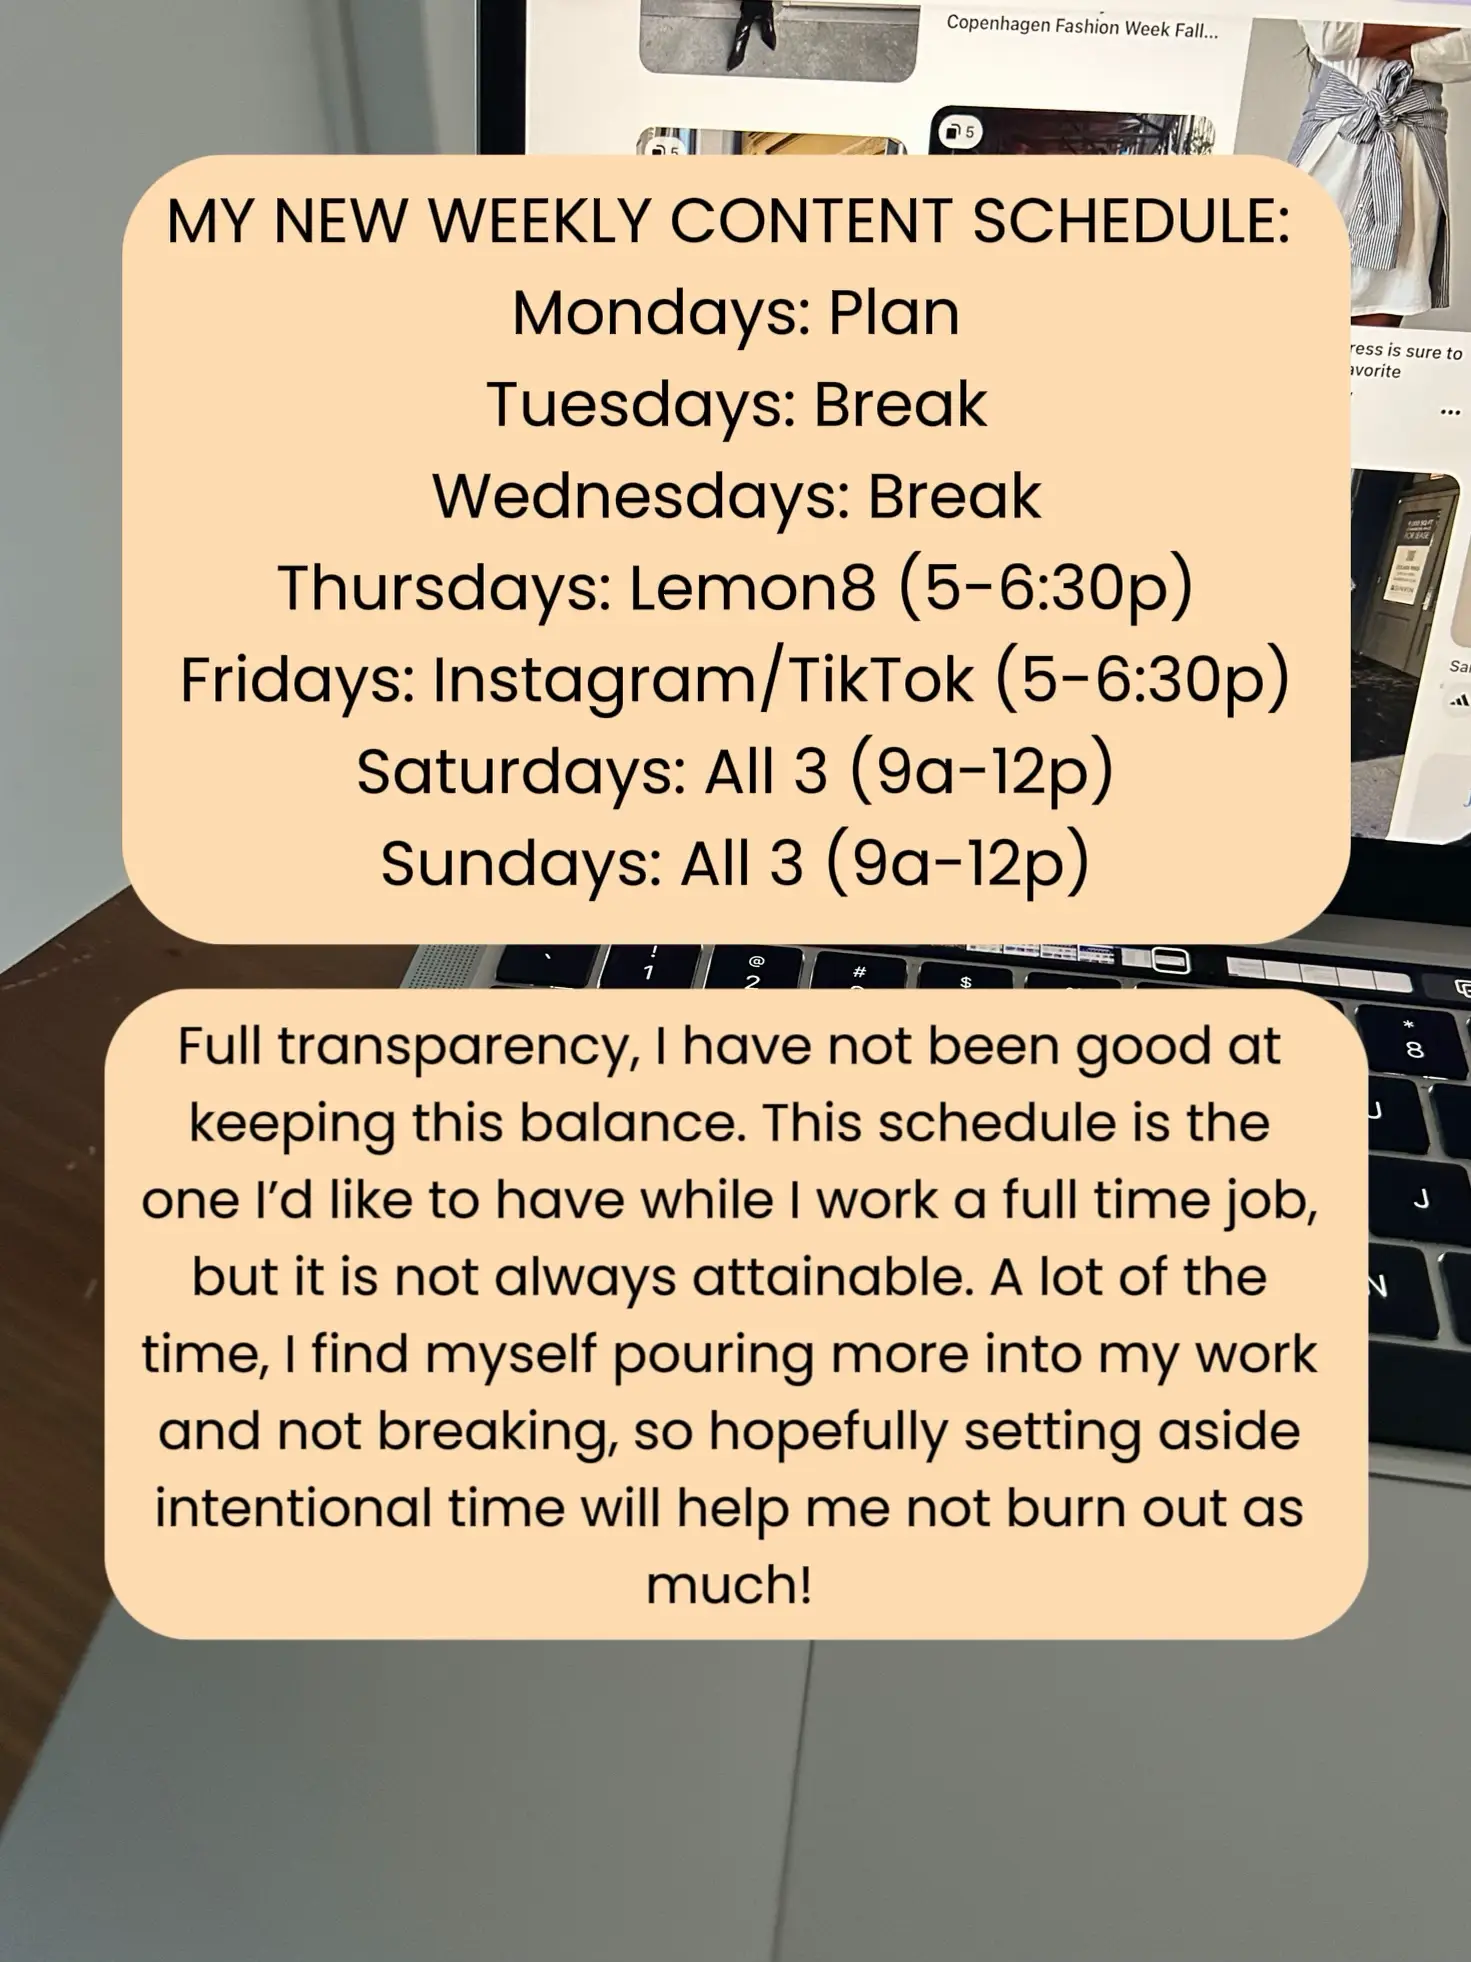  A weekly content schedule for a person working from home.